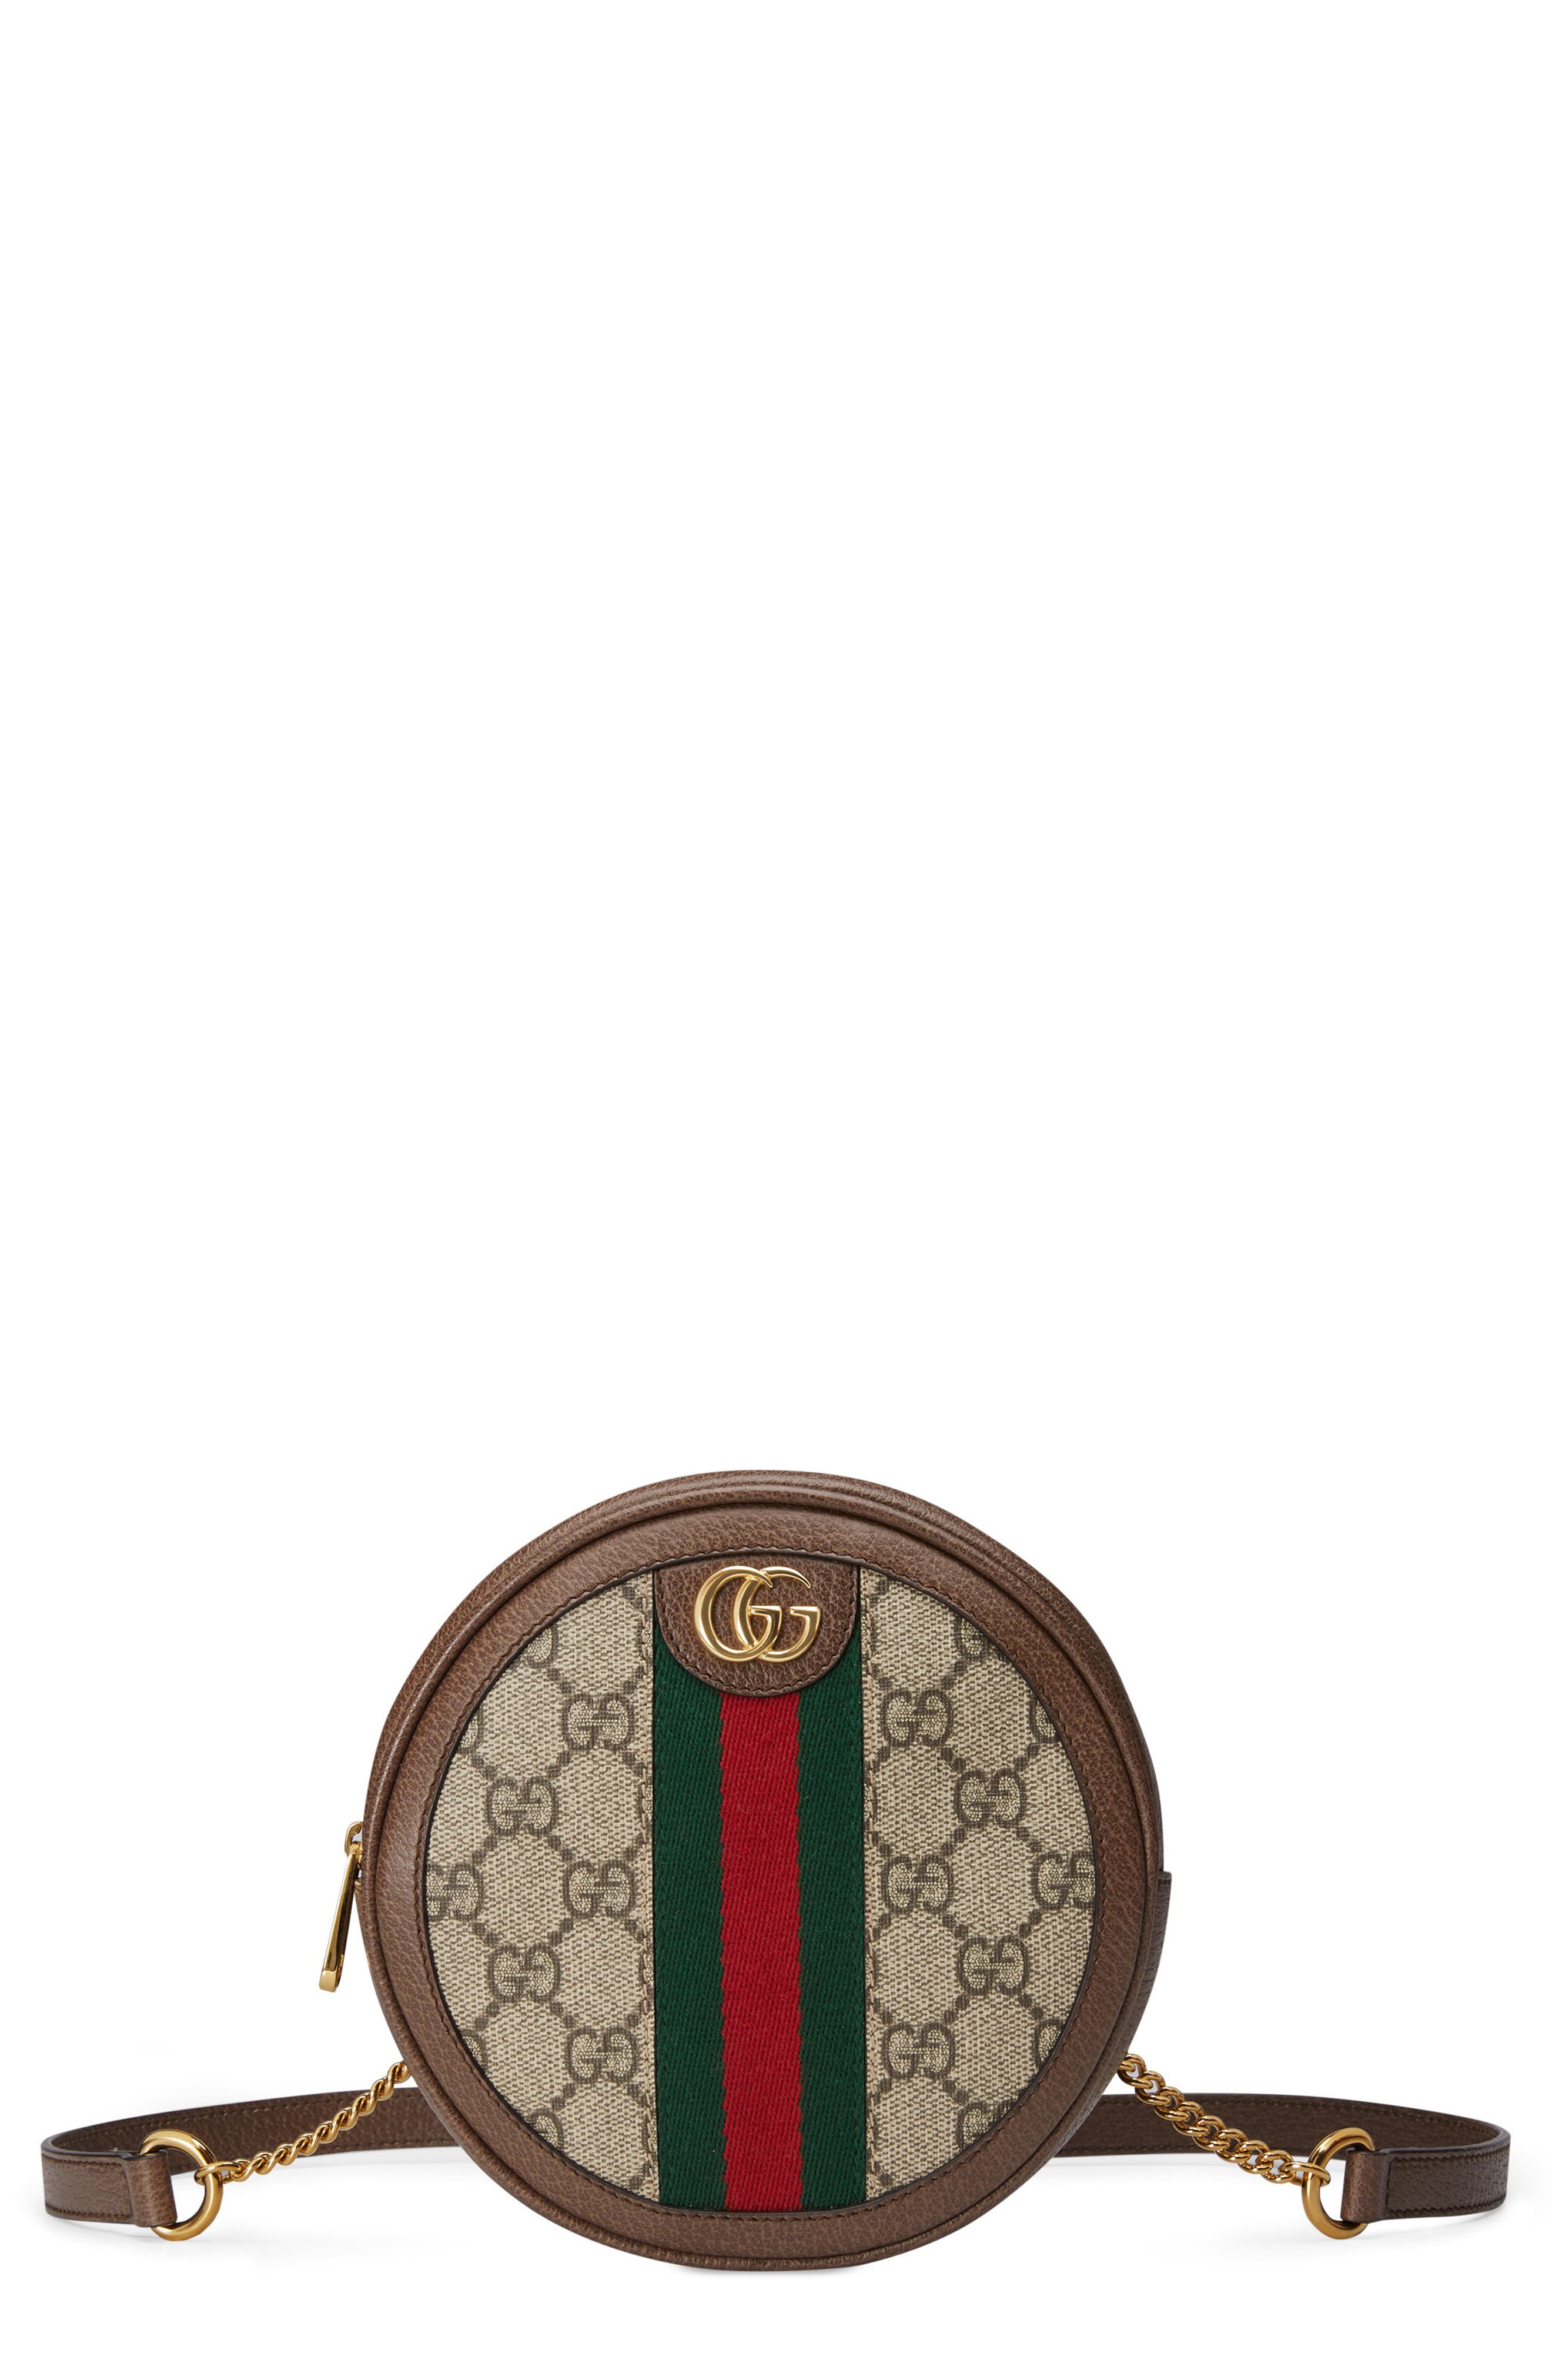 ophidia gucci backpack